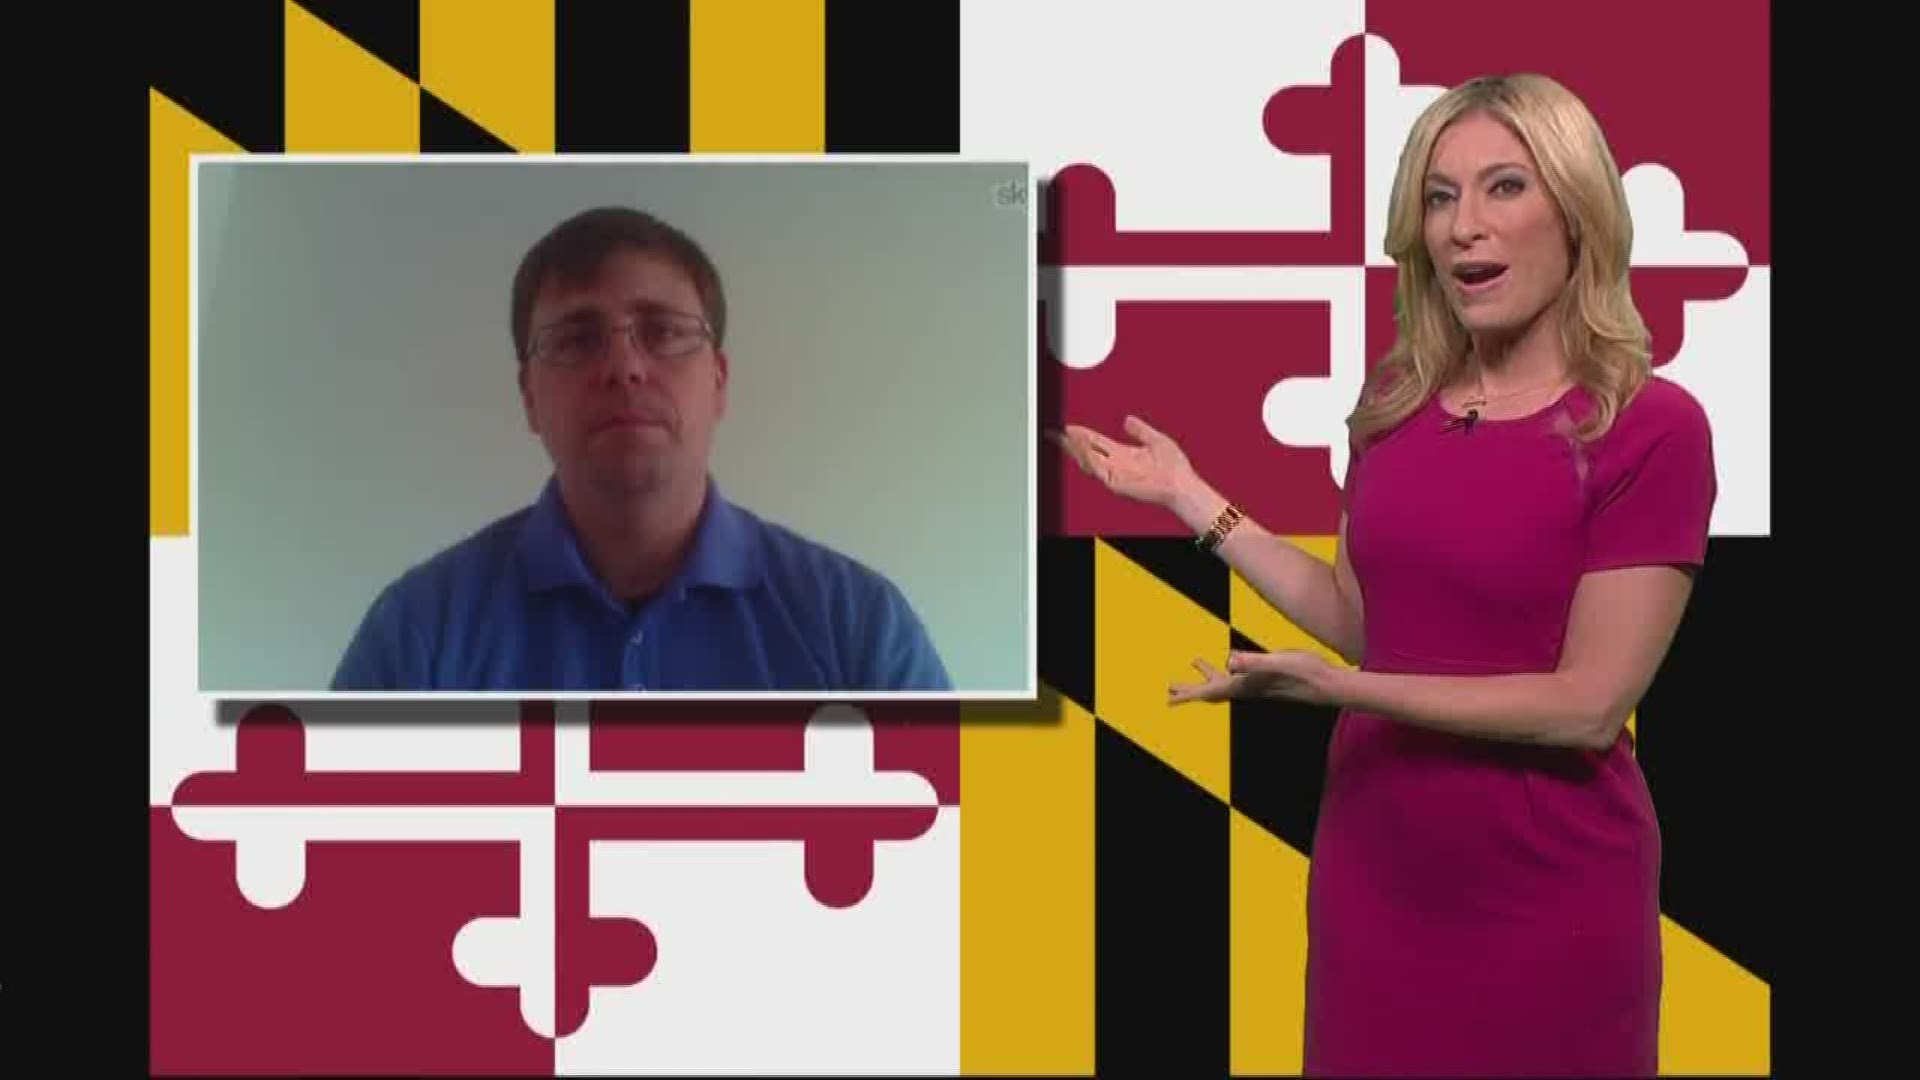 A petition to keep the Maryland flag is lighting up the internet.